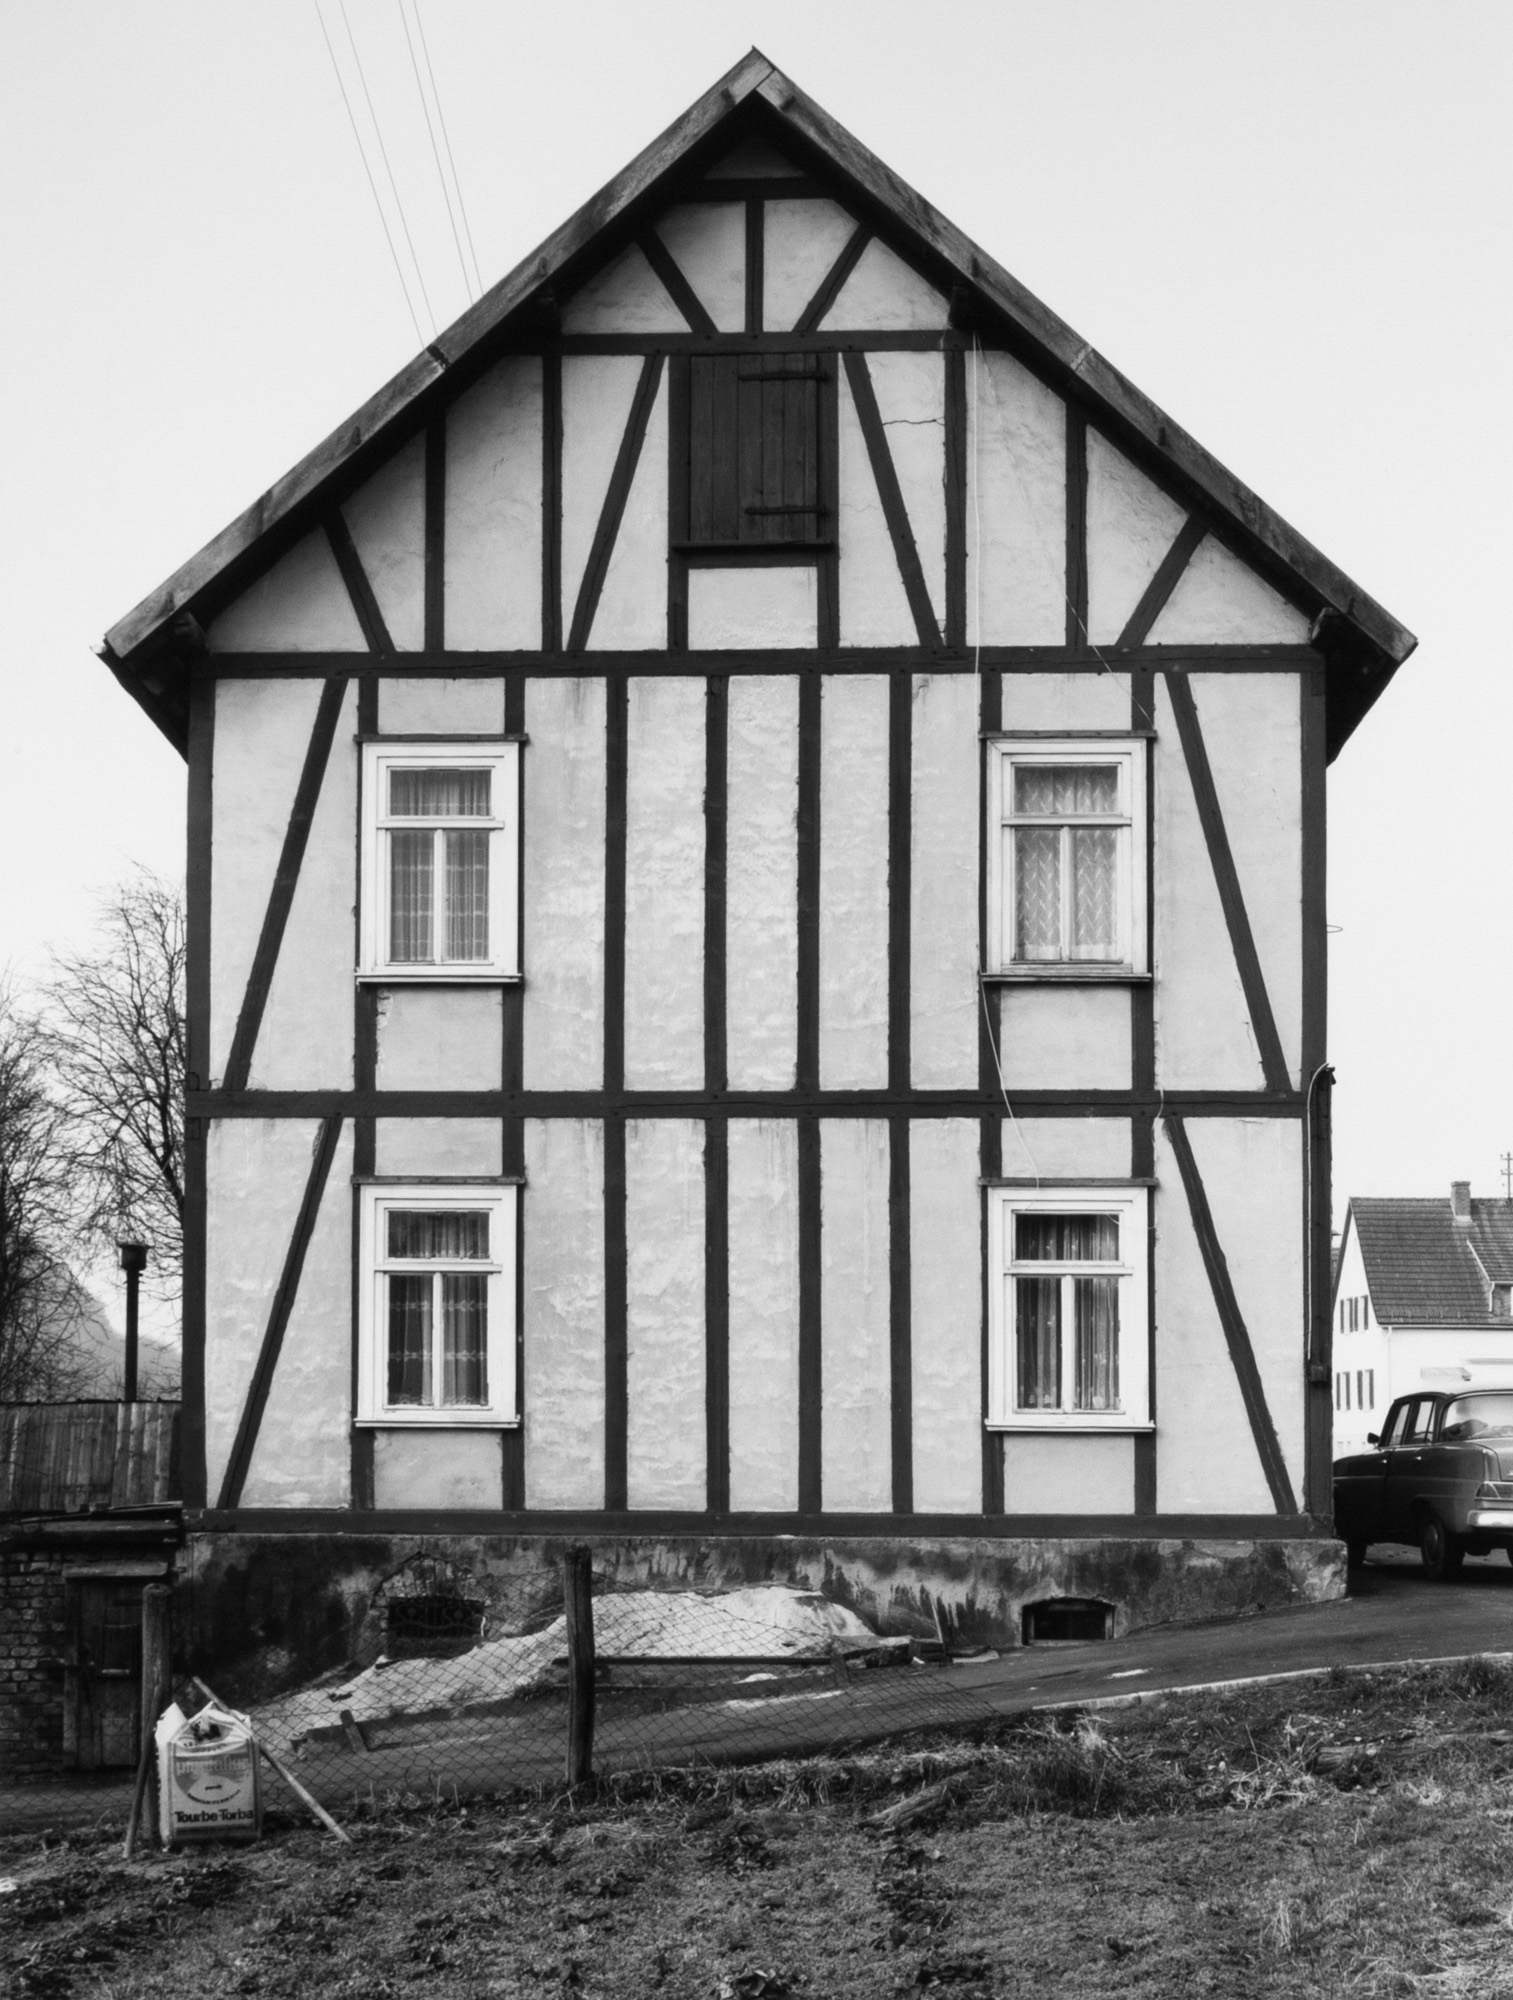 Black and white photograph of the exterior facade of a framework house